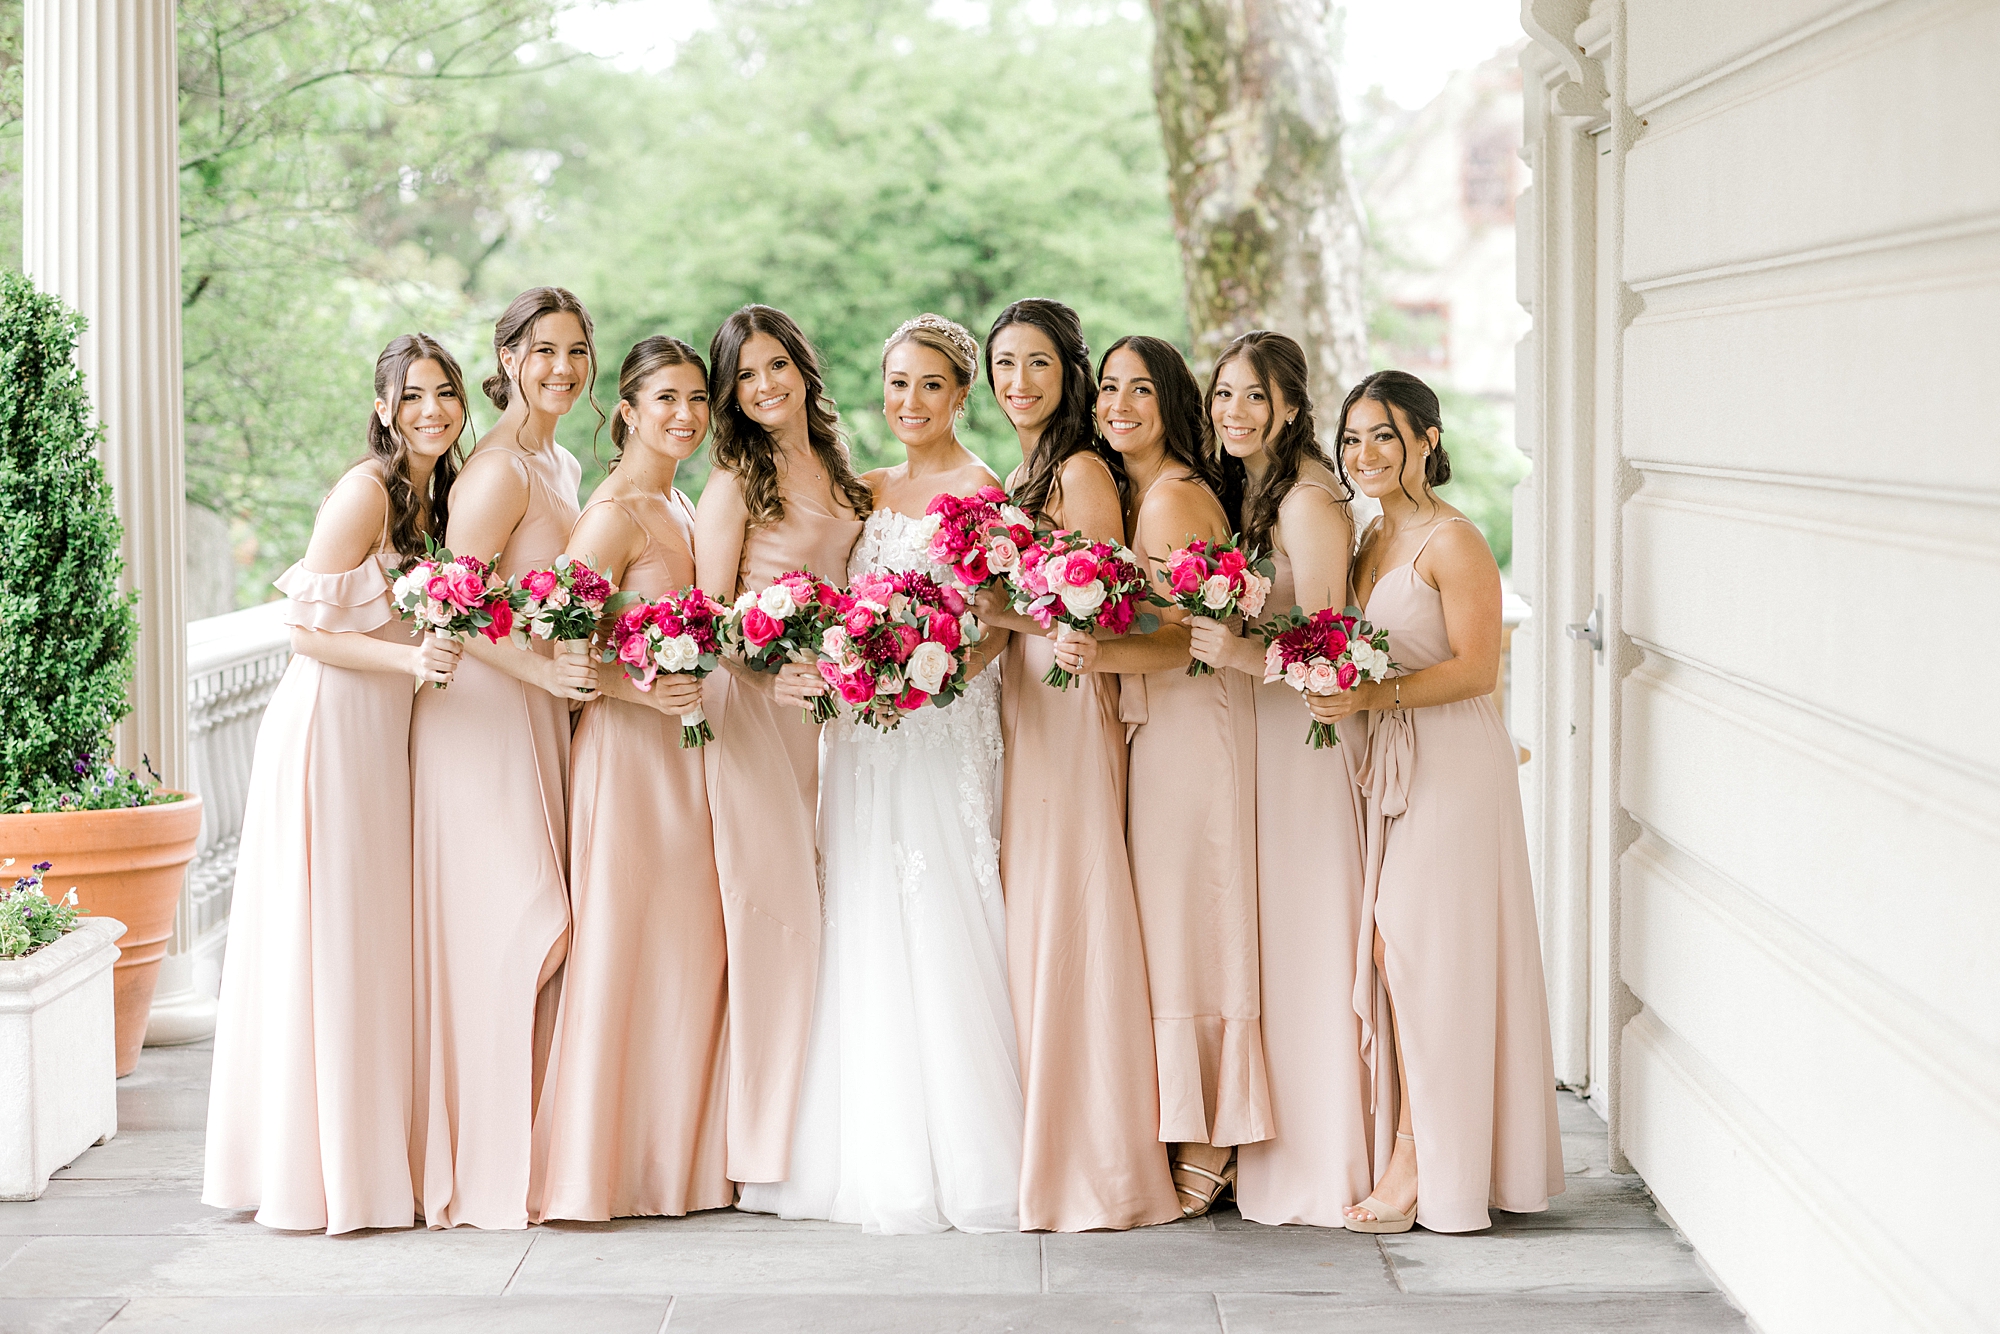 bride poses with bridesmaids in blush gowns holding bright pink flowers